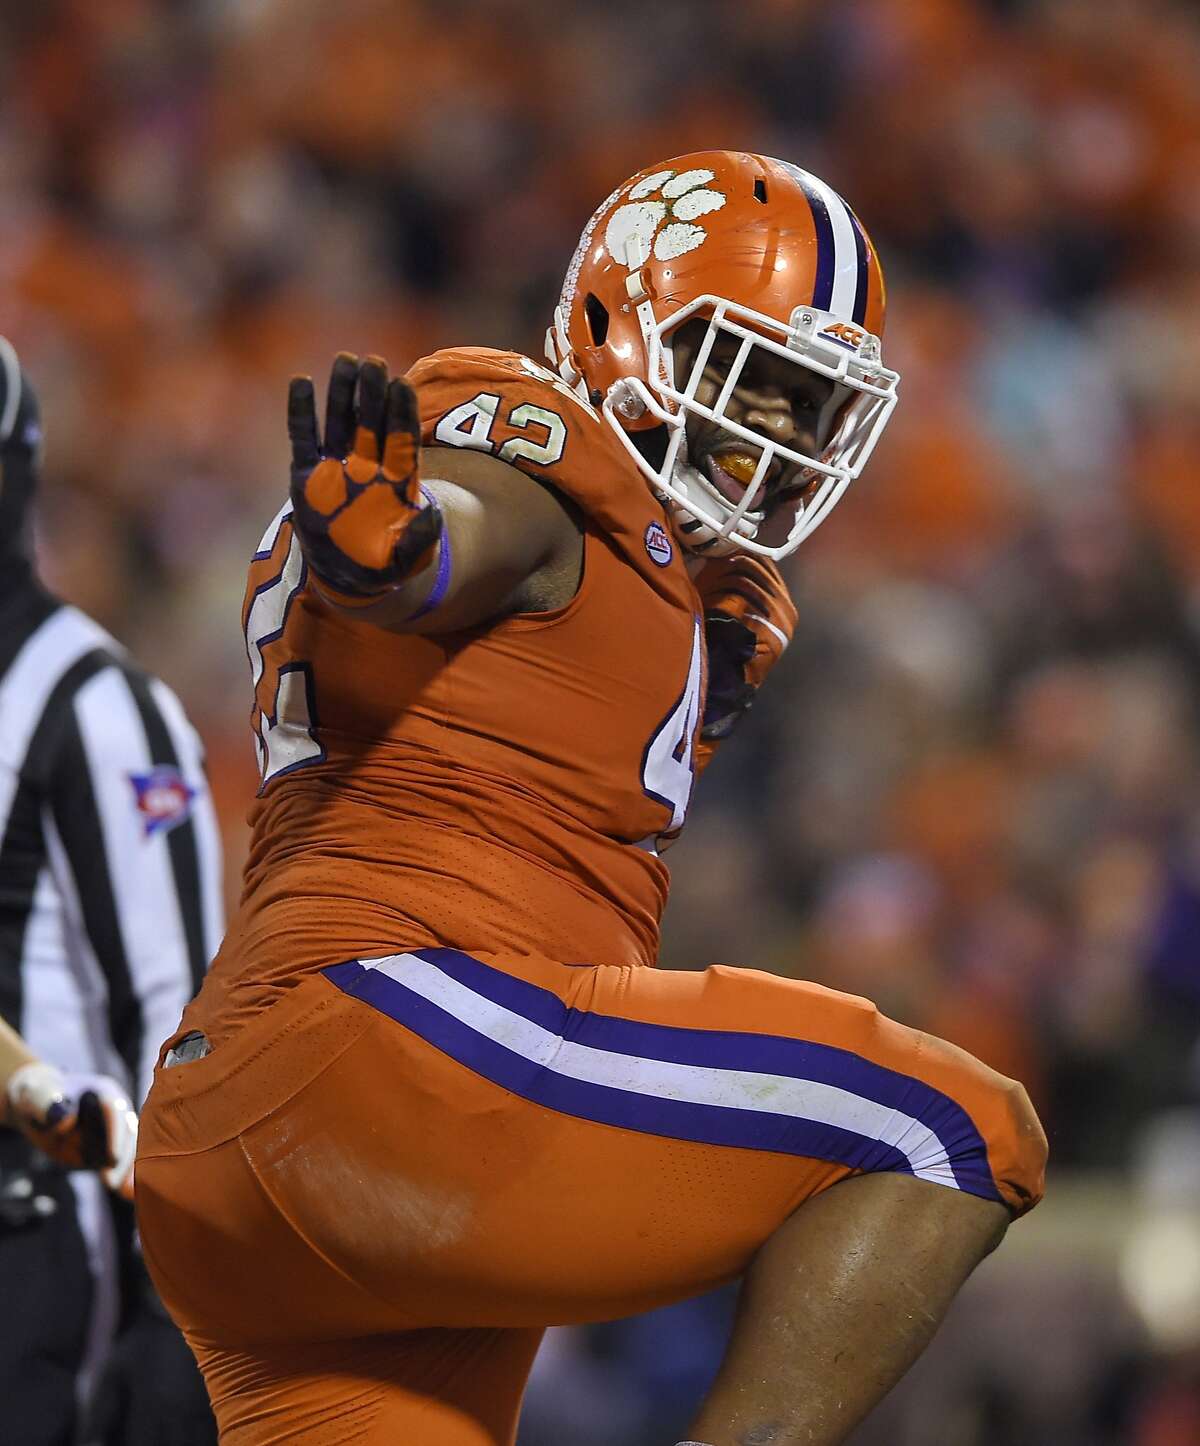 DEFENSIVE TACKLE CHRISTIAN WILKINS, CLEMSON  Wilkins didn’t test that great at the combine, which could play into the Seahawks’ favor considering they’ll be picking late in the first round (and potentially even early second round if they trade back far enough). Many of the top-tier defensive linemen will go in the top 20, and Wilkins is one of those who could slip outside of that window into the Seahawks’ lap.  A winner of two national titles at Clemson, Wilkins was an elite three-technique pass rusher for the Tigers. He had 15 tackles for loss, six sacks and two forced fumbles as a senior last year. Wilkins also earned the William V. Campbell Trophy in 2018 for a combination of his work in the classroom, the community and on-field performance. He’s a guy that won’t have issues with off the field.  A Seattle interior D-line with Wilkins, Jarran Reed and Poona Ford could wreak havoc on opposing offensive fronts in 2019.